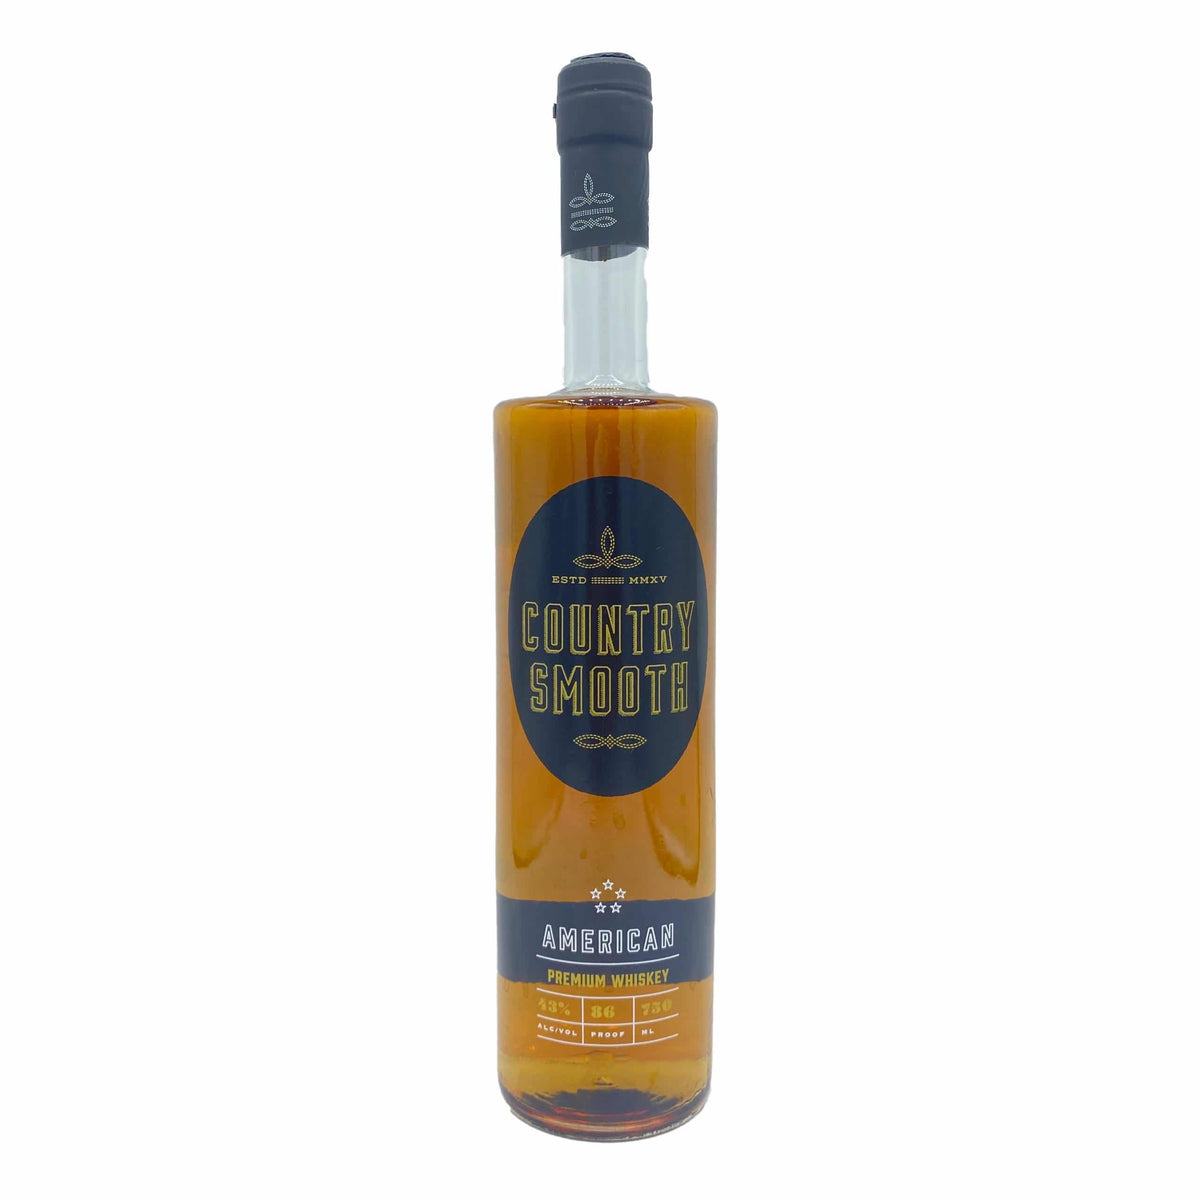 Country Smooth American Premium Whiskey - Barbank